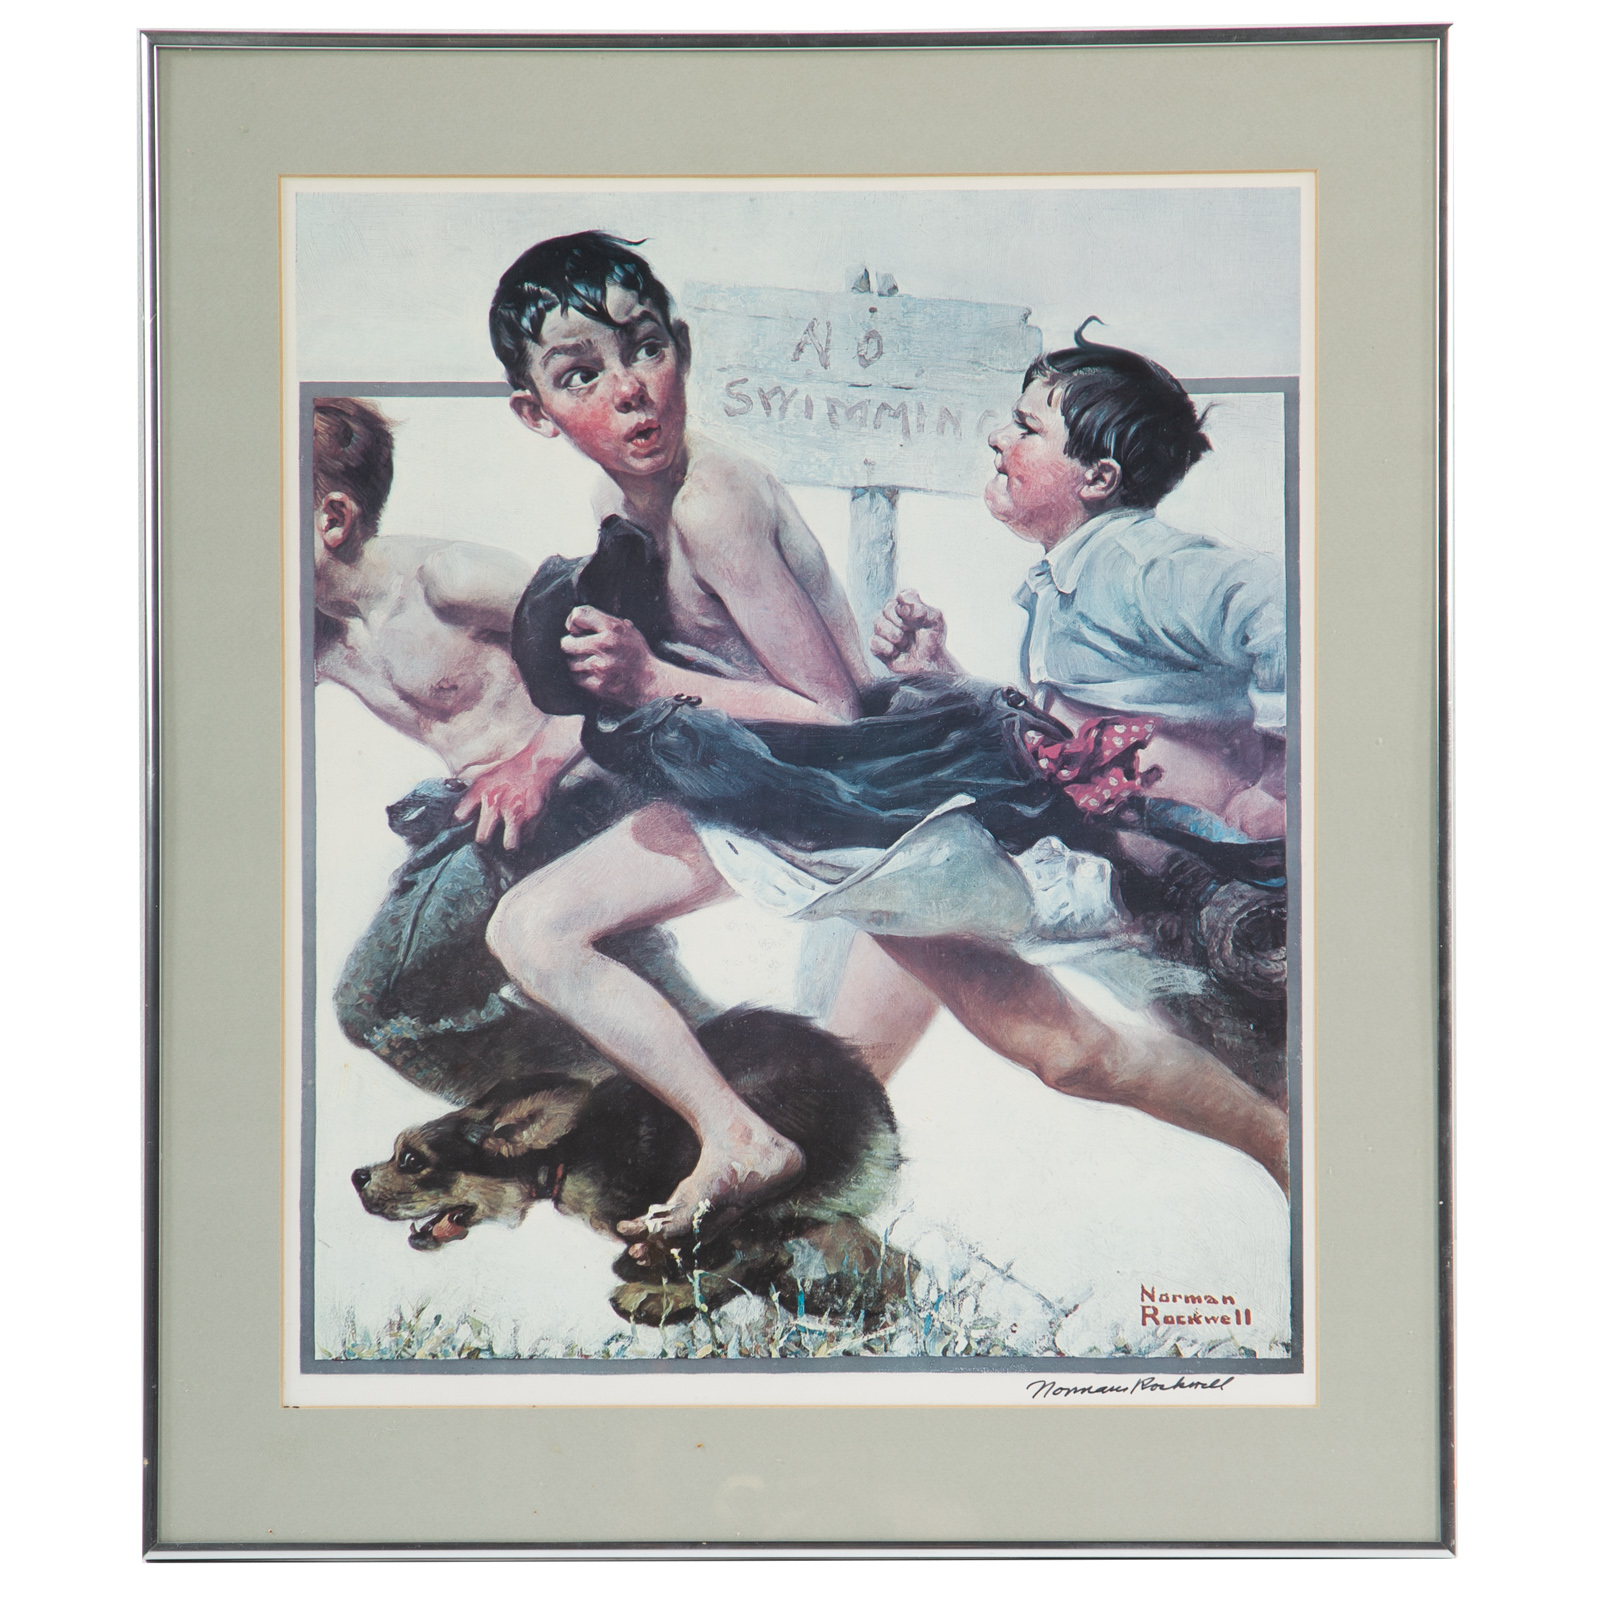 NORMAN ROCKWELL. "NO SWIMMING,"